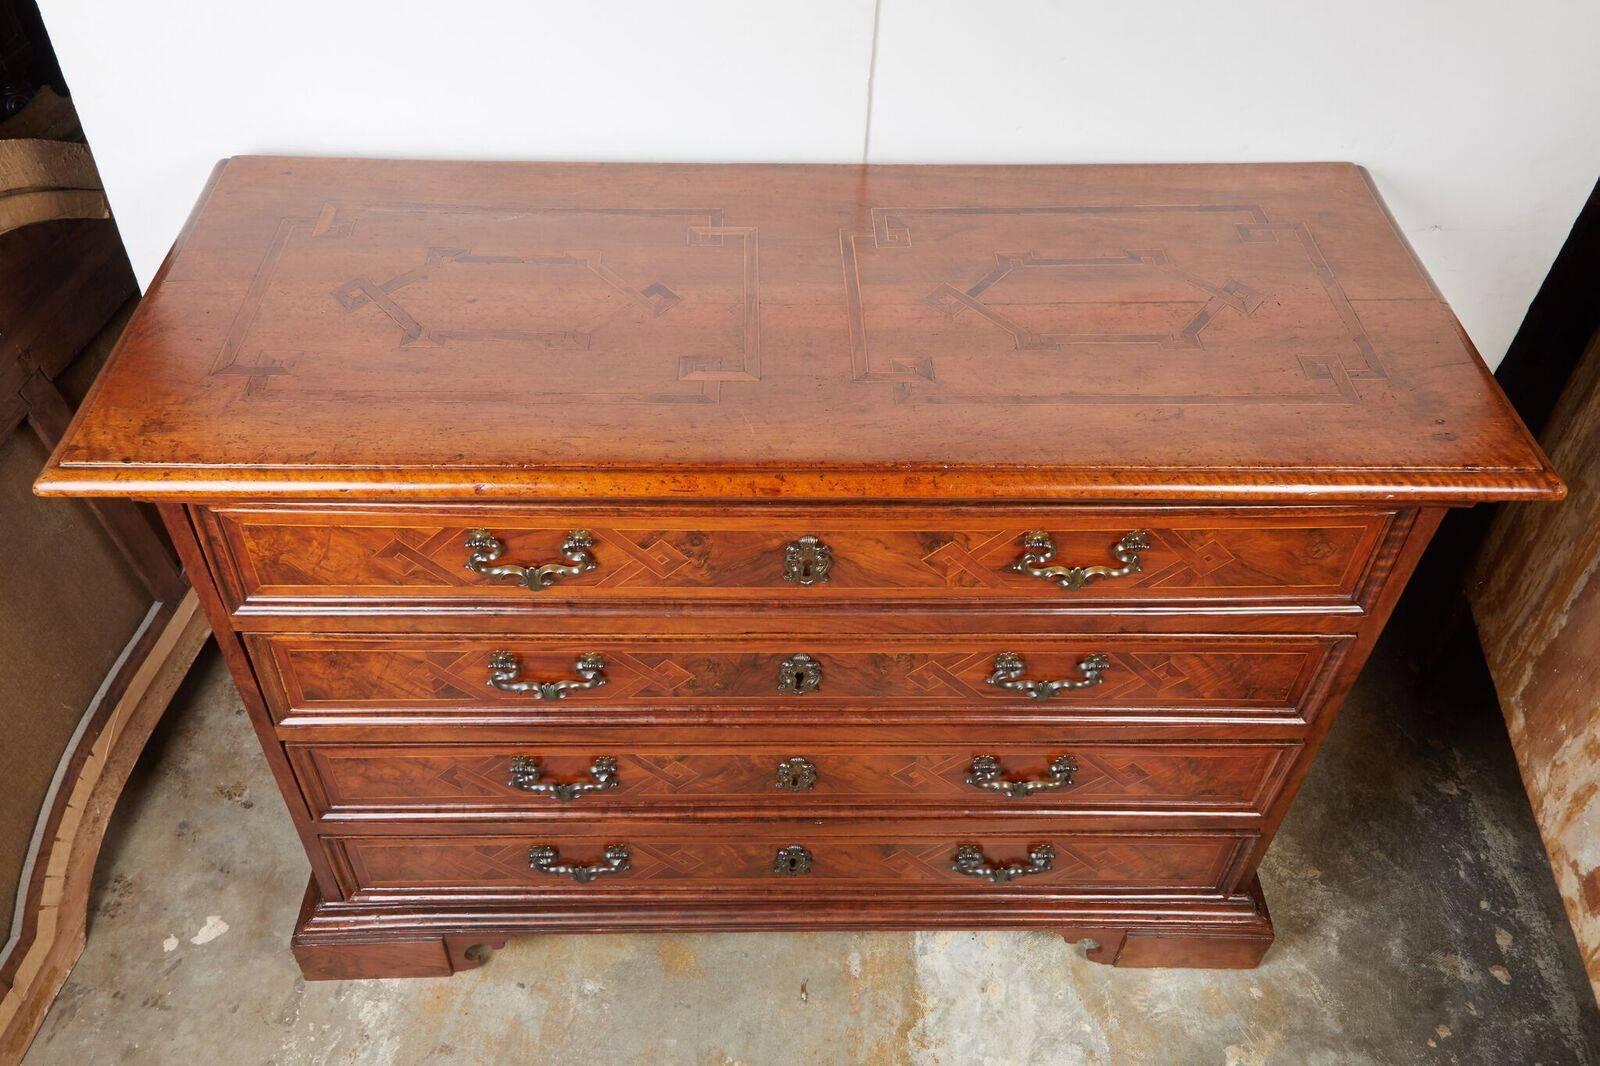 Handsome, Italian commode featuring four panelled drawers atop an elevated base. The piece is fully finished as the drawers, overhanging top and sides are inlaid with burl and pear woods with a repeating, geometric motif.